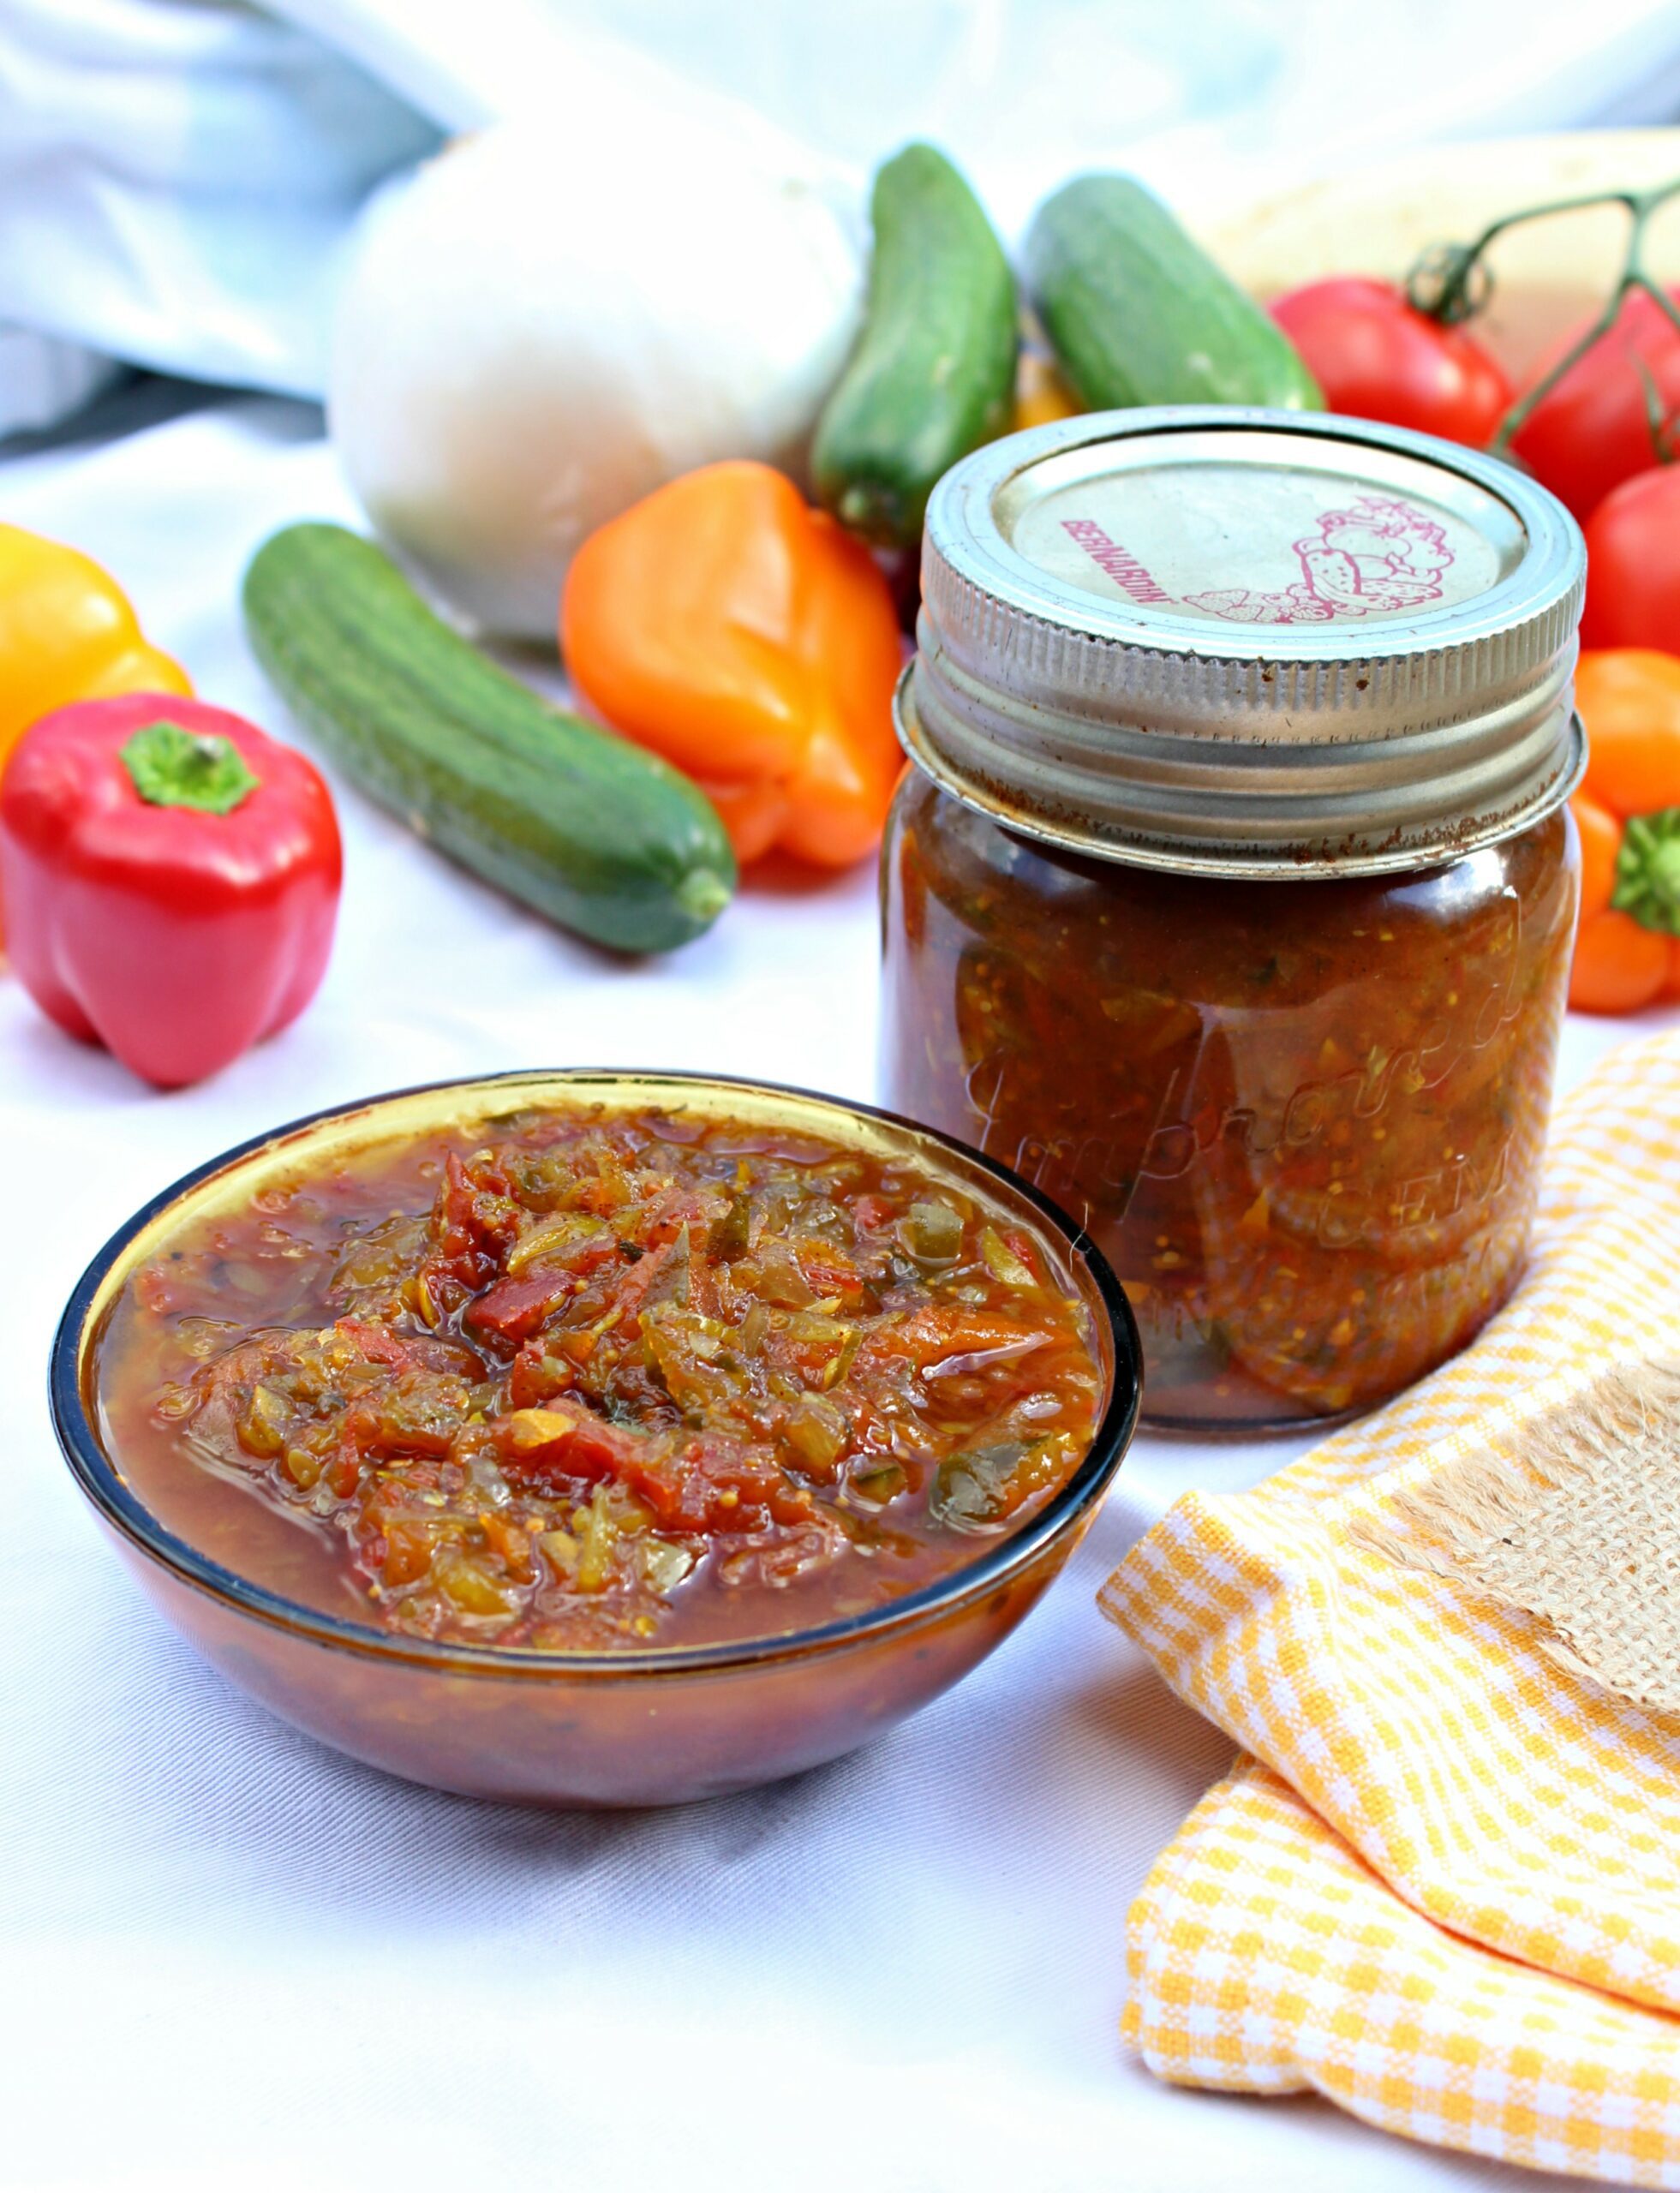 Red Hamburger relish is sweet sour and zesty! Tastes delicious on hamburgers and sausage, or any other meat. A delicious way to use your garden vegetables: cucumbers, tomatoes, zucchini, peppers, and onions. You'll come back to this easy canning recipe again and again!